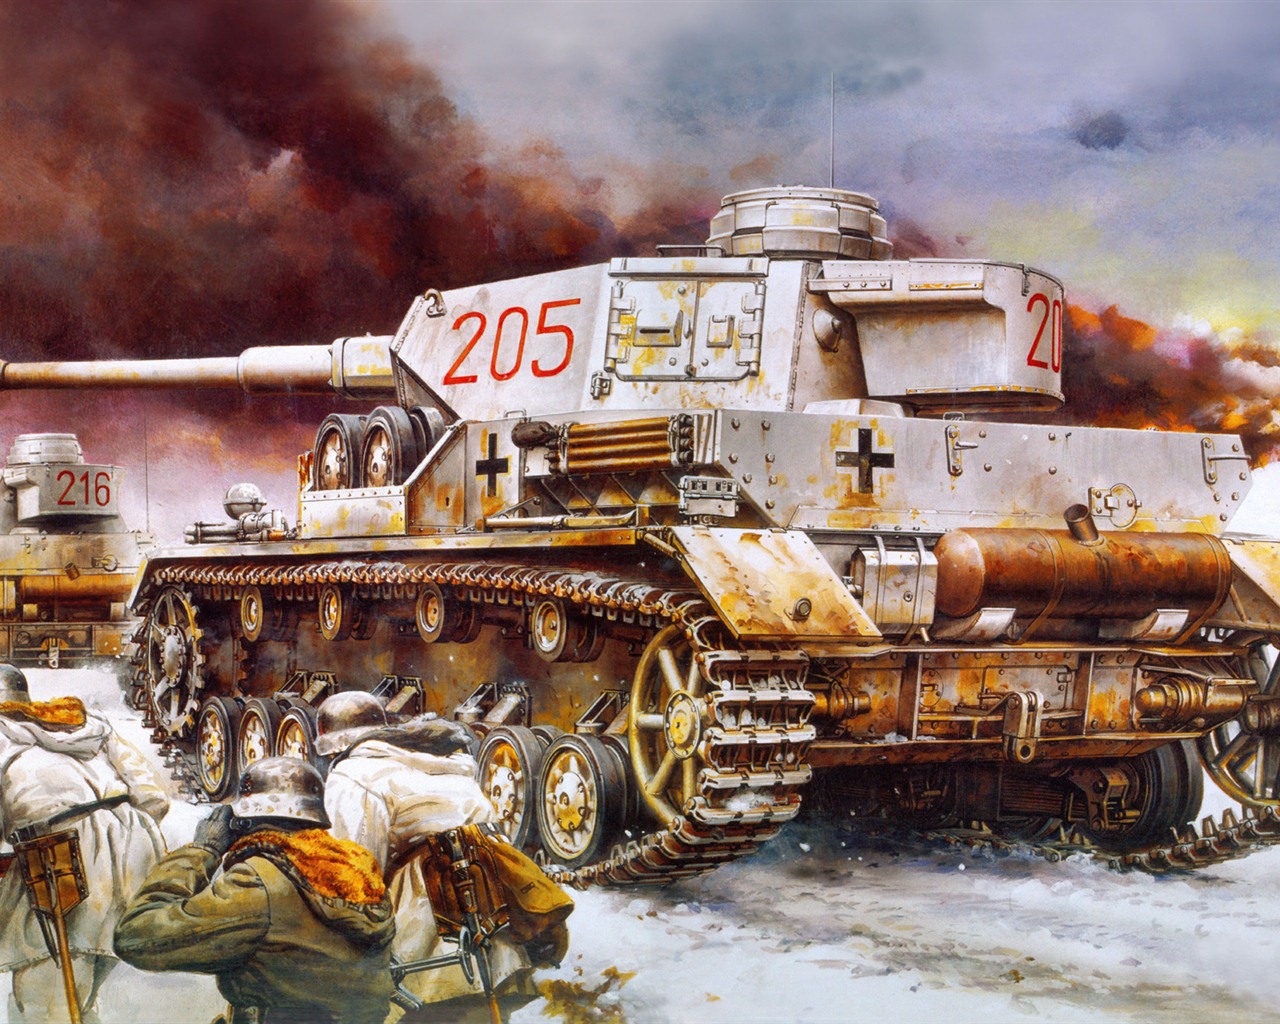 Military tanks, armored HD painting wallpapers #15 - 1280x1024